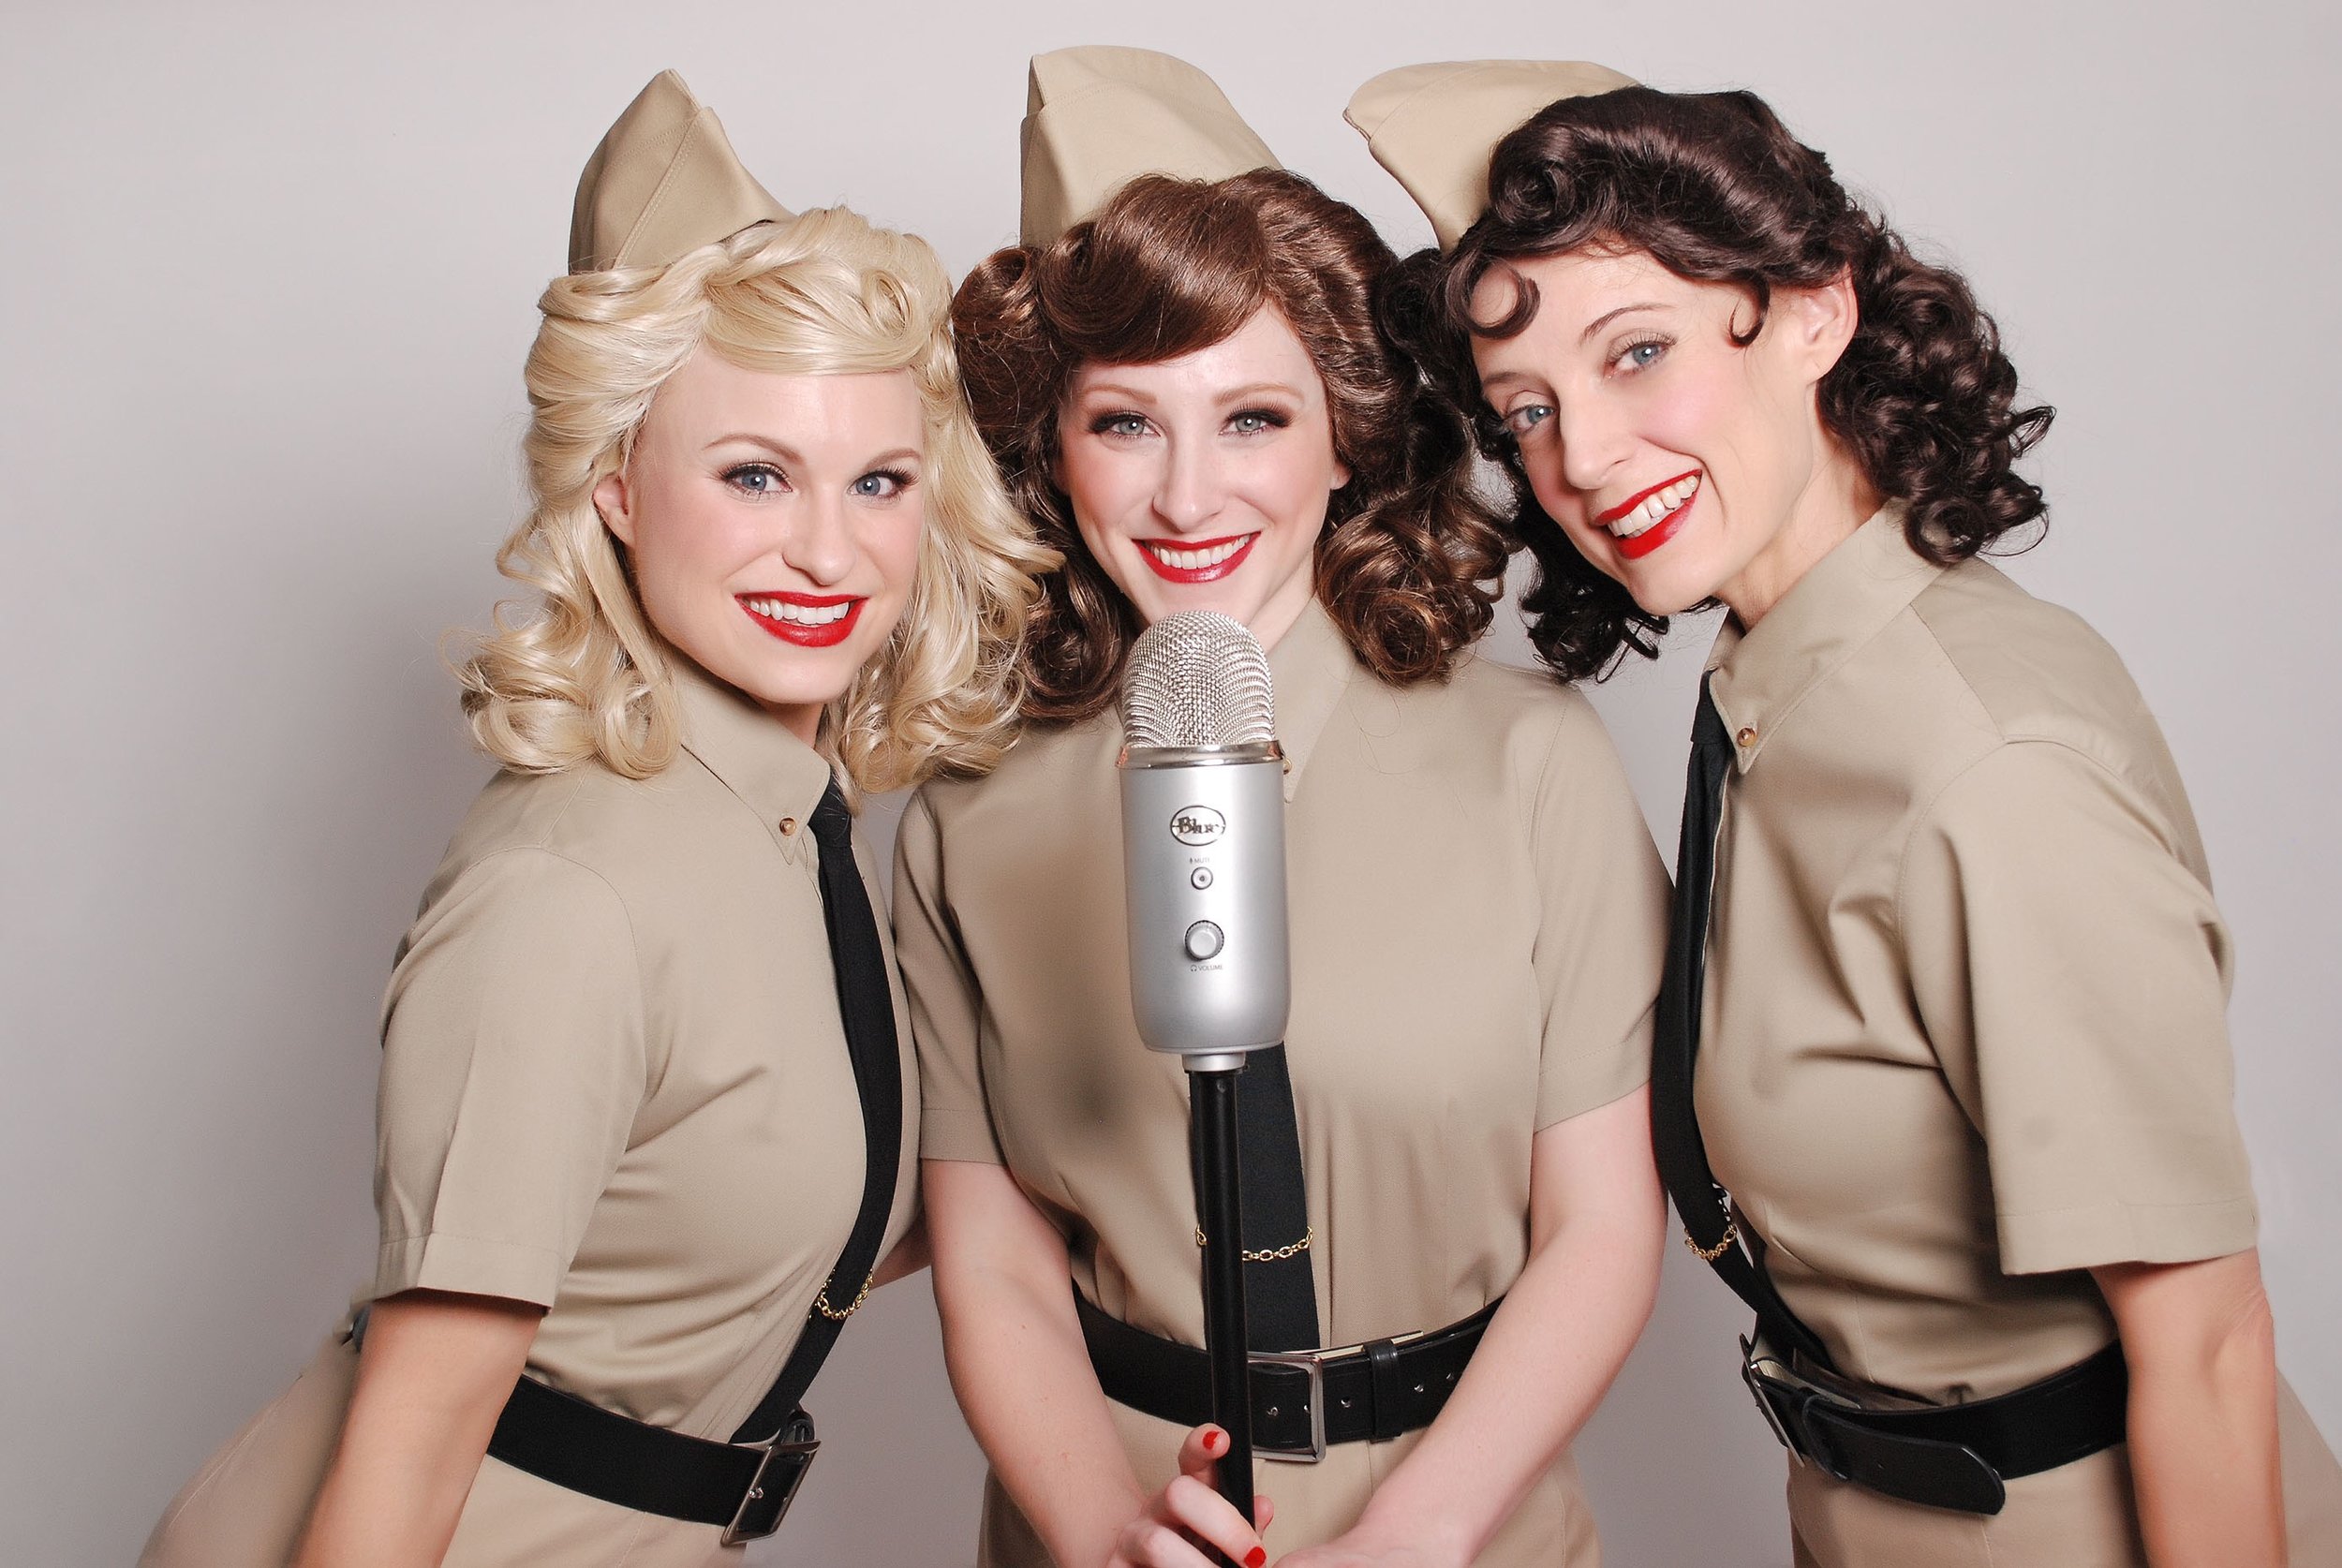 The Swing Dolls as The Andrews Sister Blue microphone